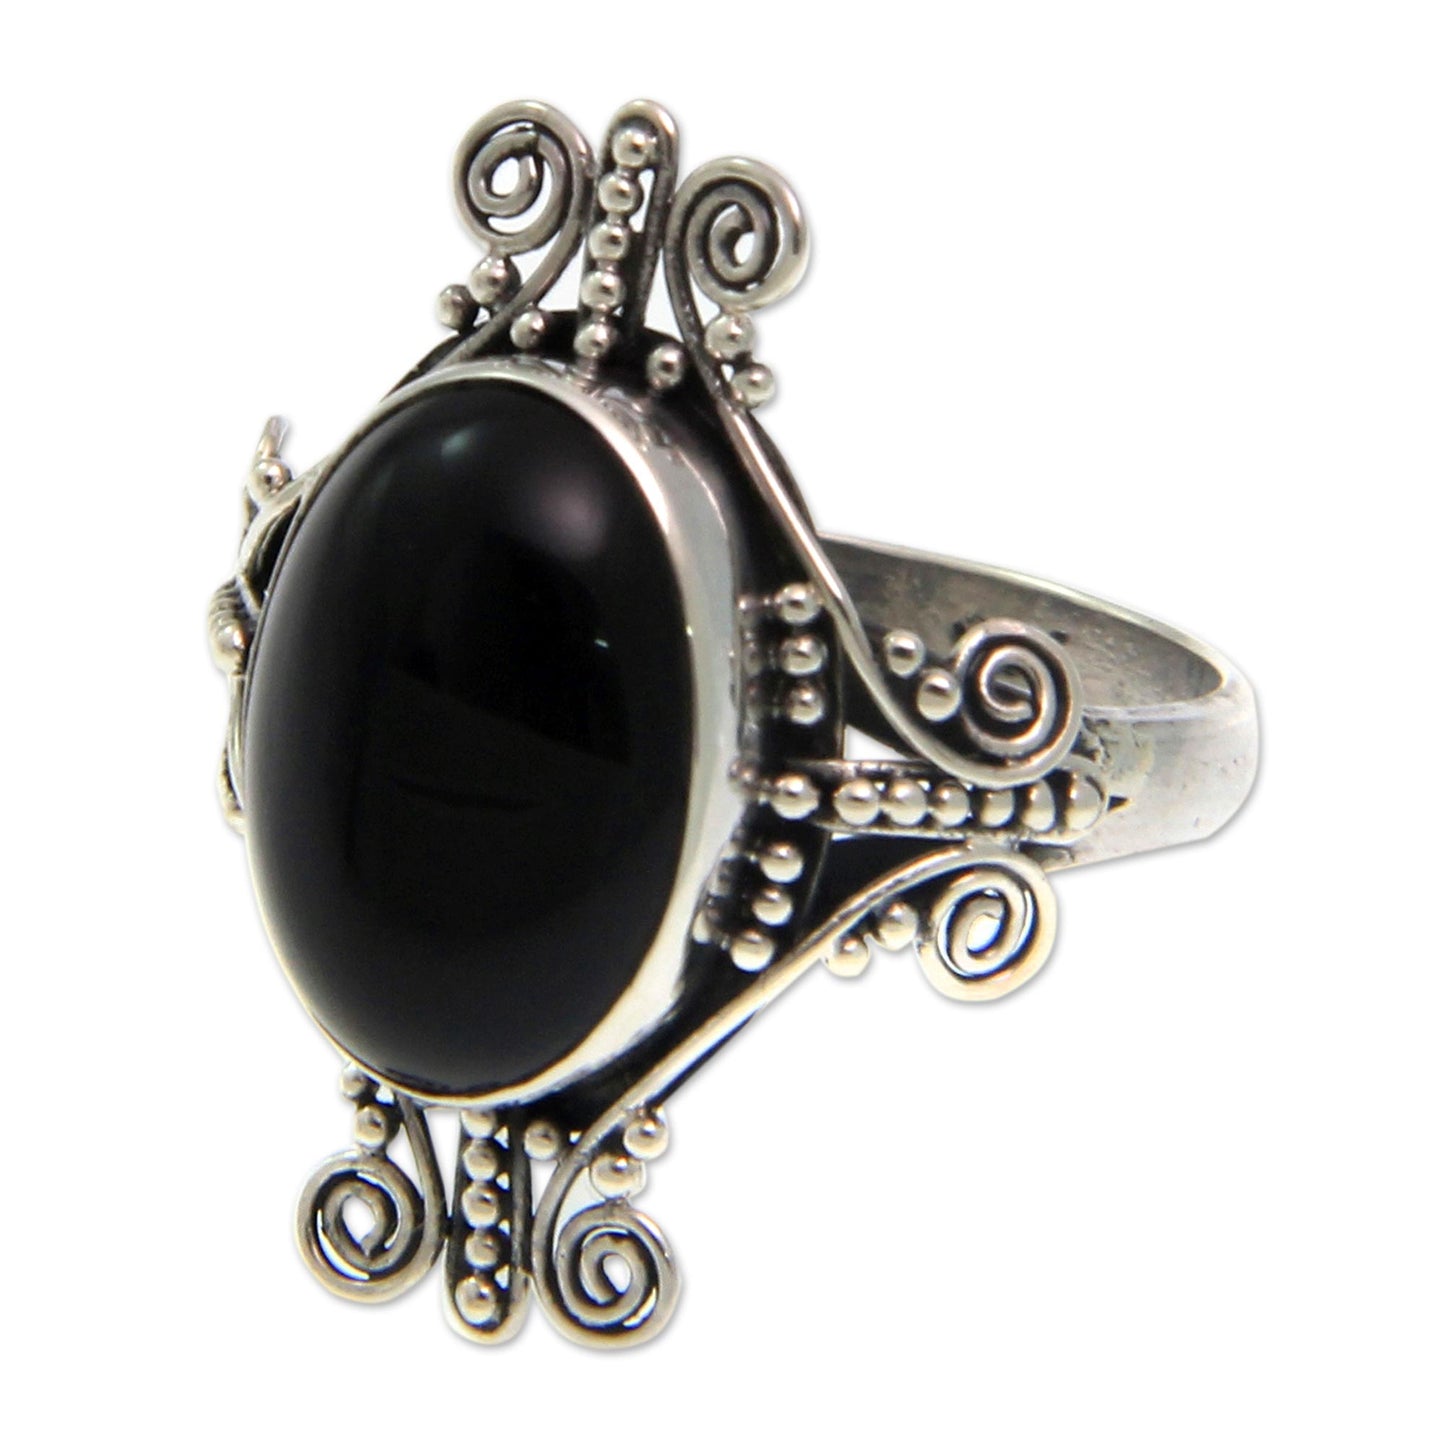 Dreams of Bali Sterling Silver and Onyx Ring